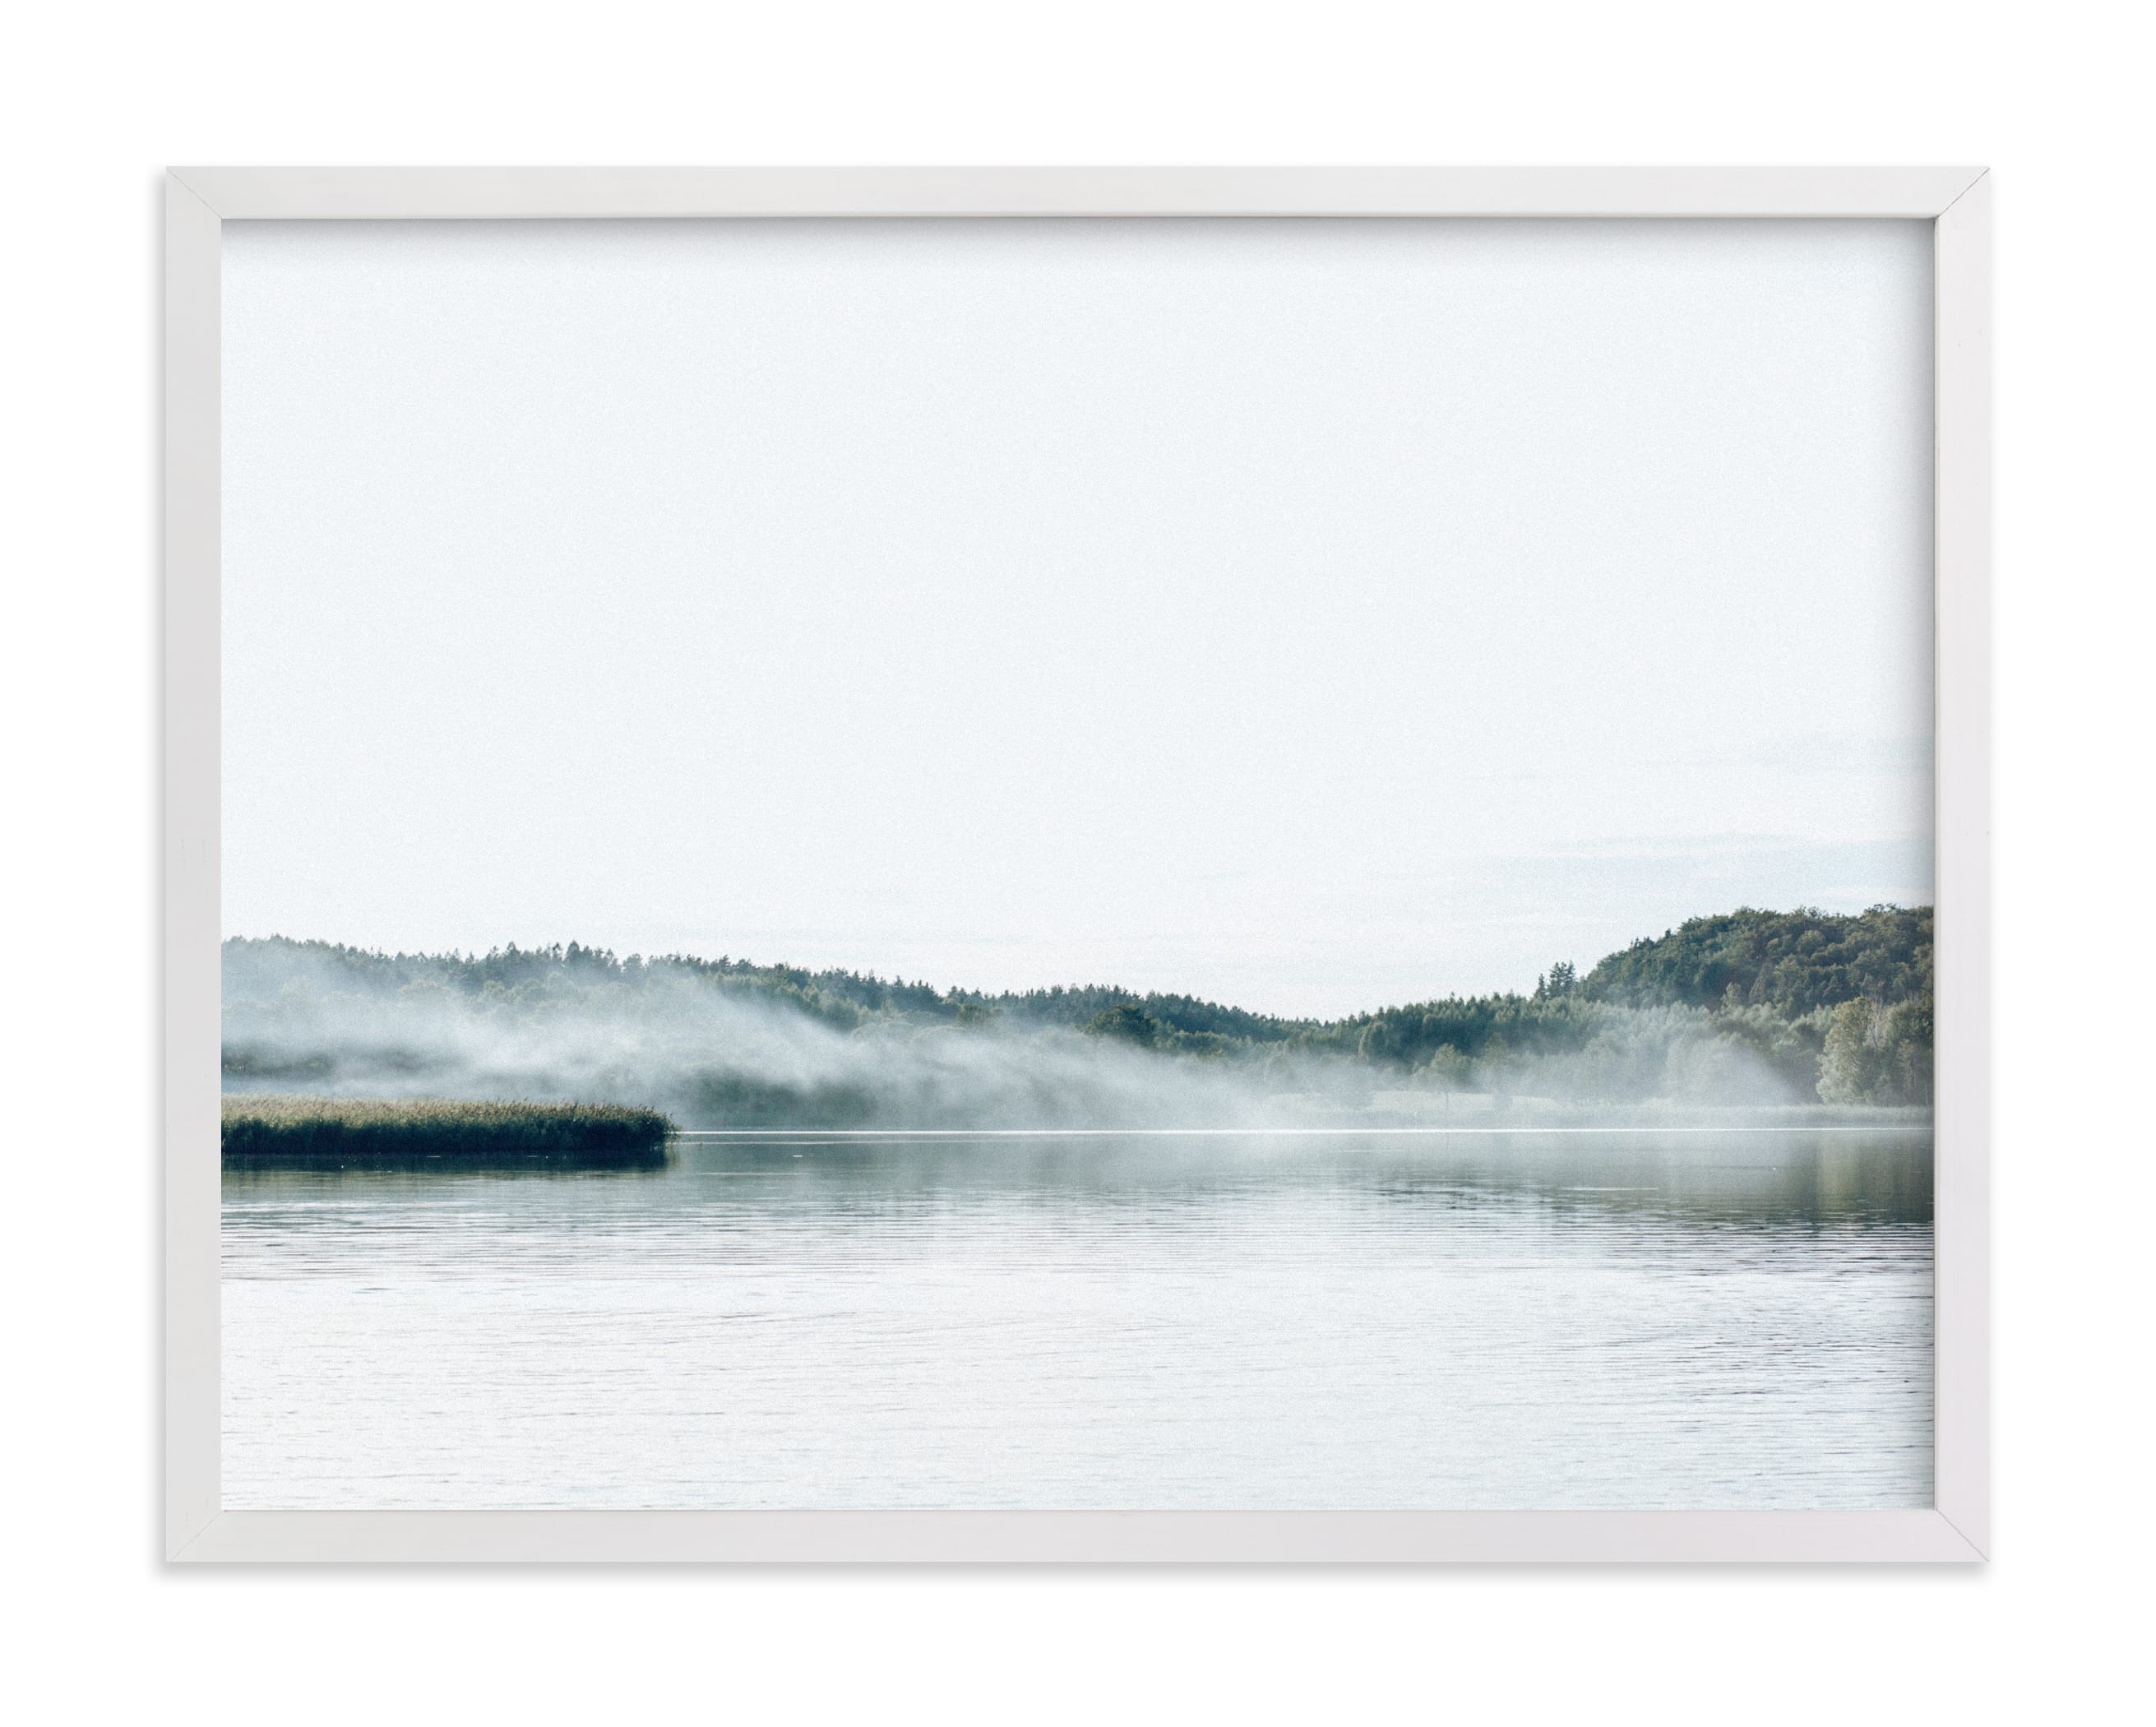 "WhiteLake" by Lying on the grass in beautiful frame options and a variety of sizes.